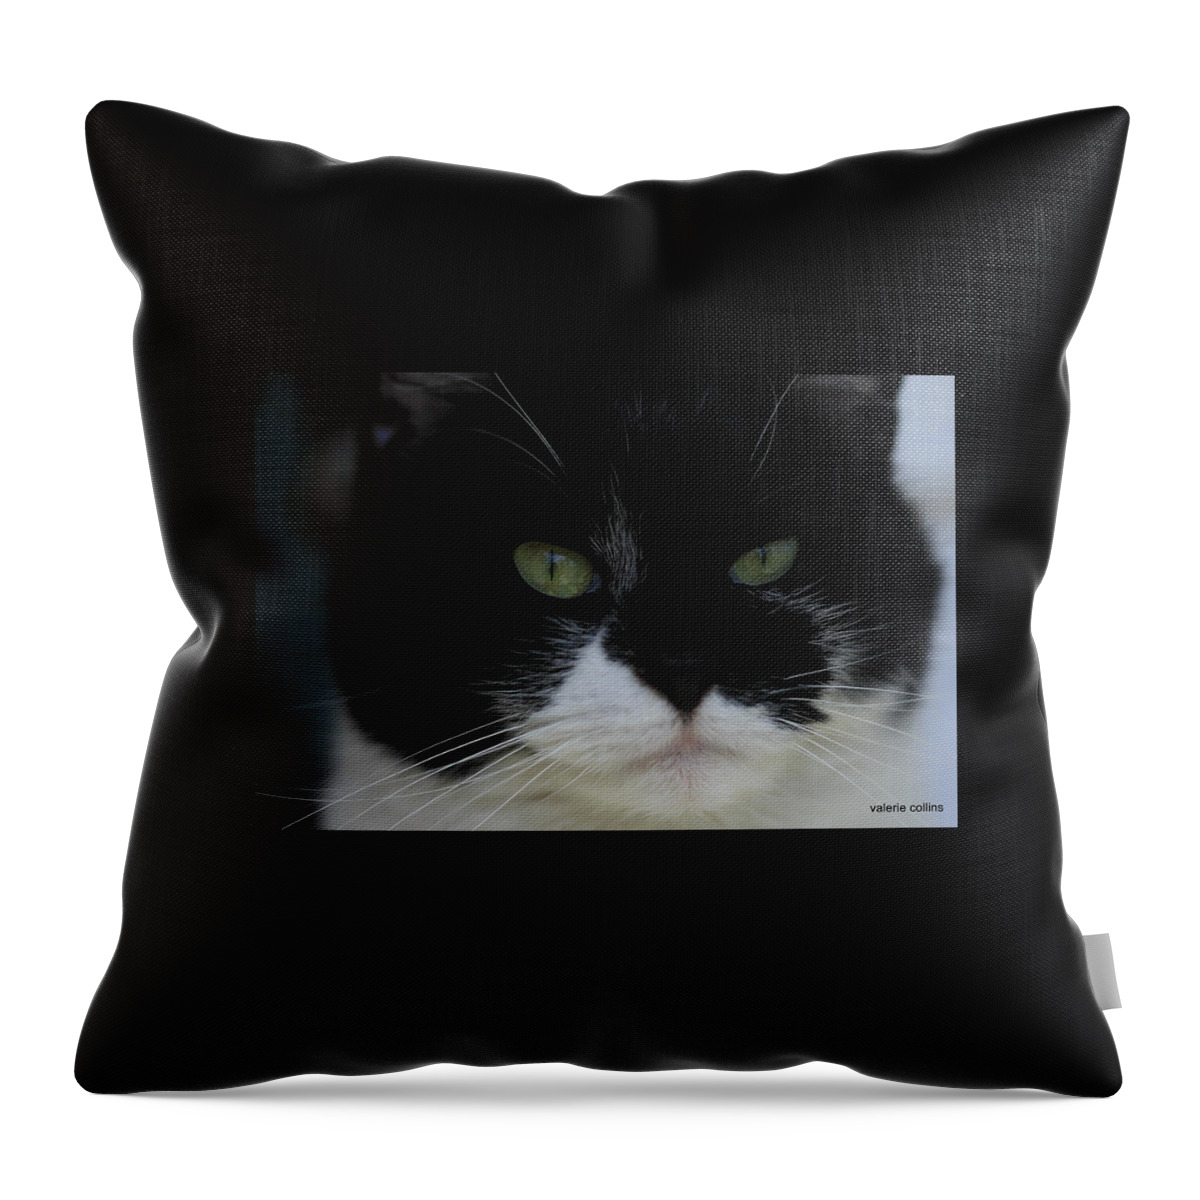 Tuxedo Throw Pillow featuring the photograph Green Eyes of a Tuxedo Cat by Valerie Collins